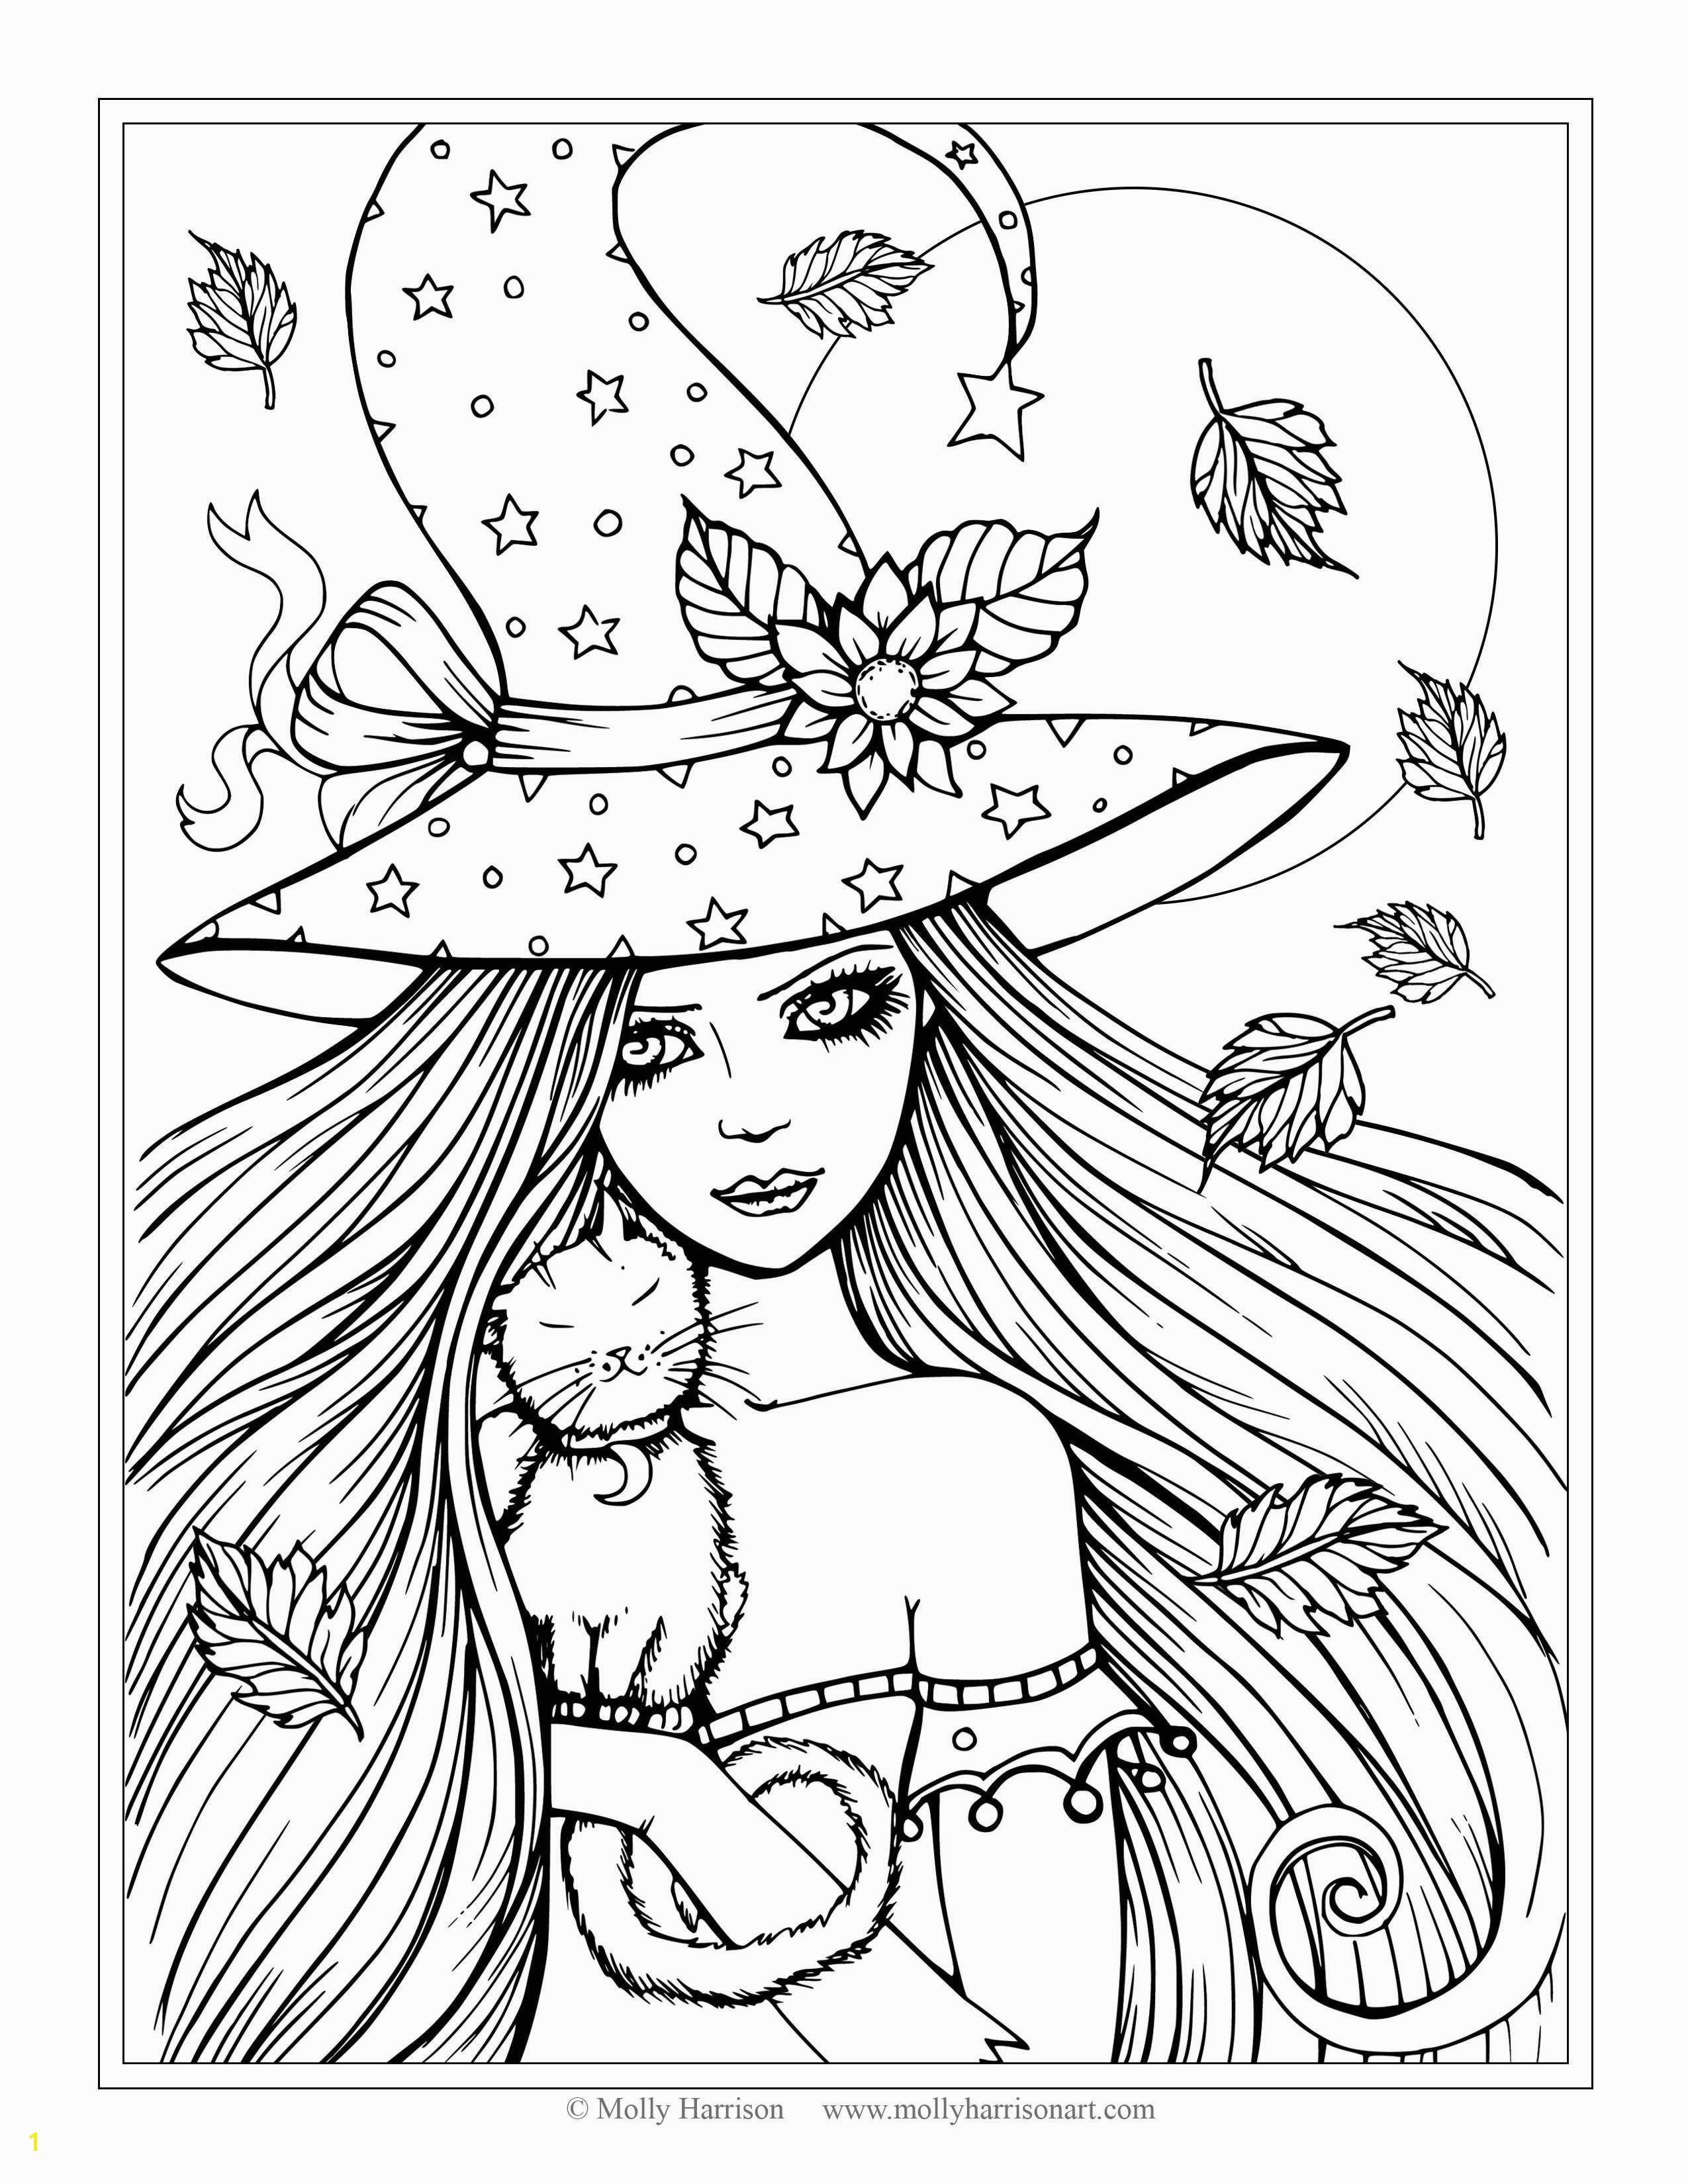 Kickball Coloring Pages Cats Coloring Pages Cool Coloring Page Unique Witch Coloring Pages